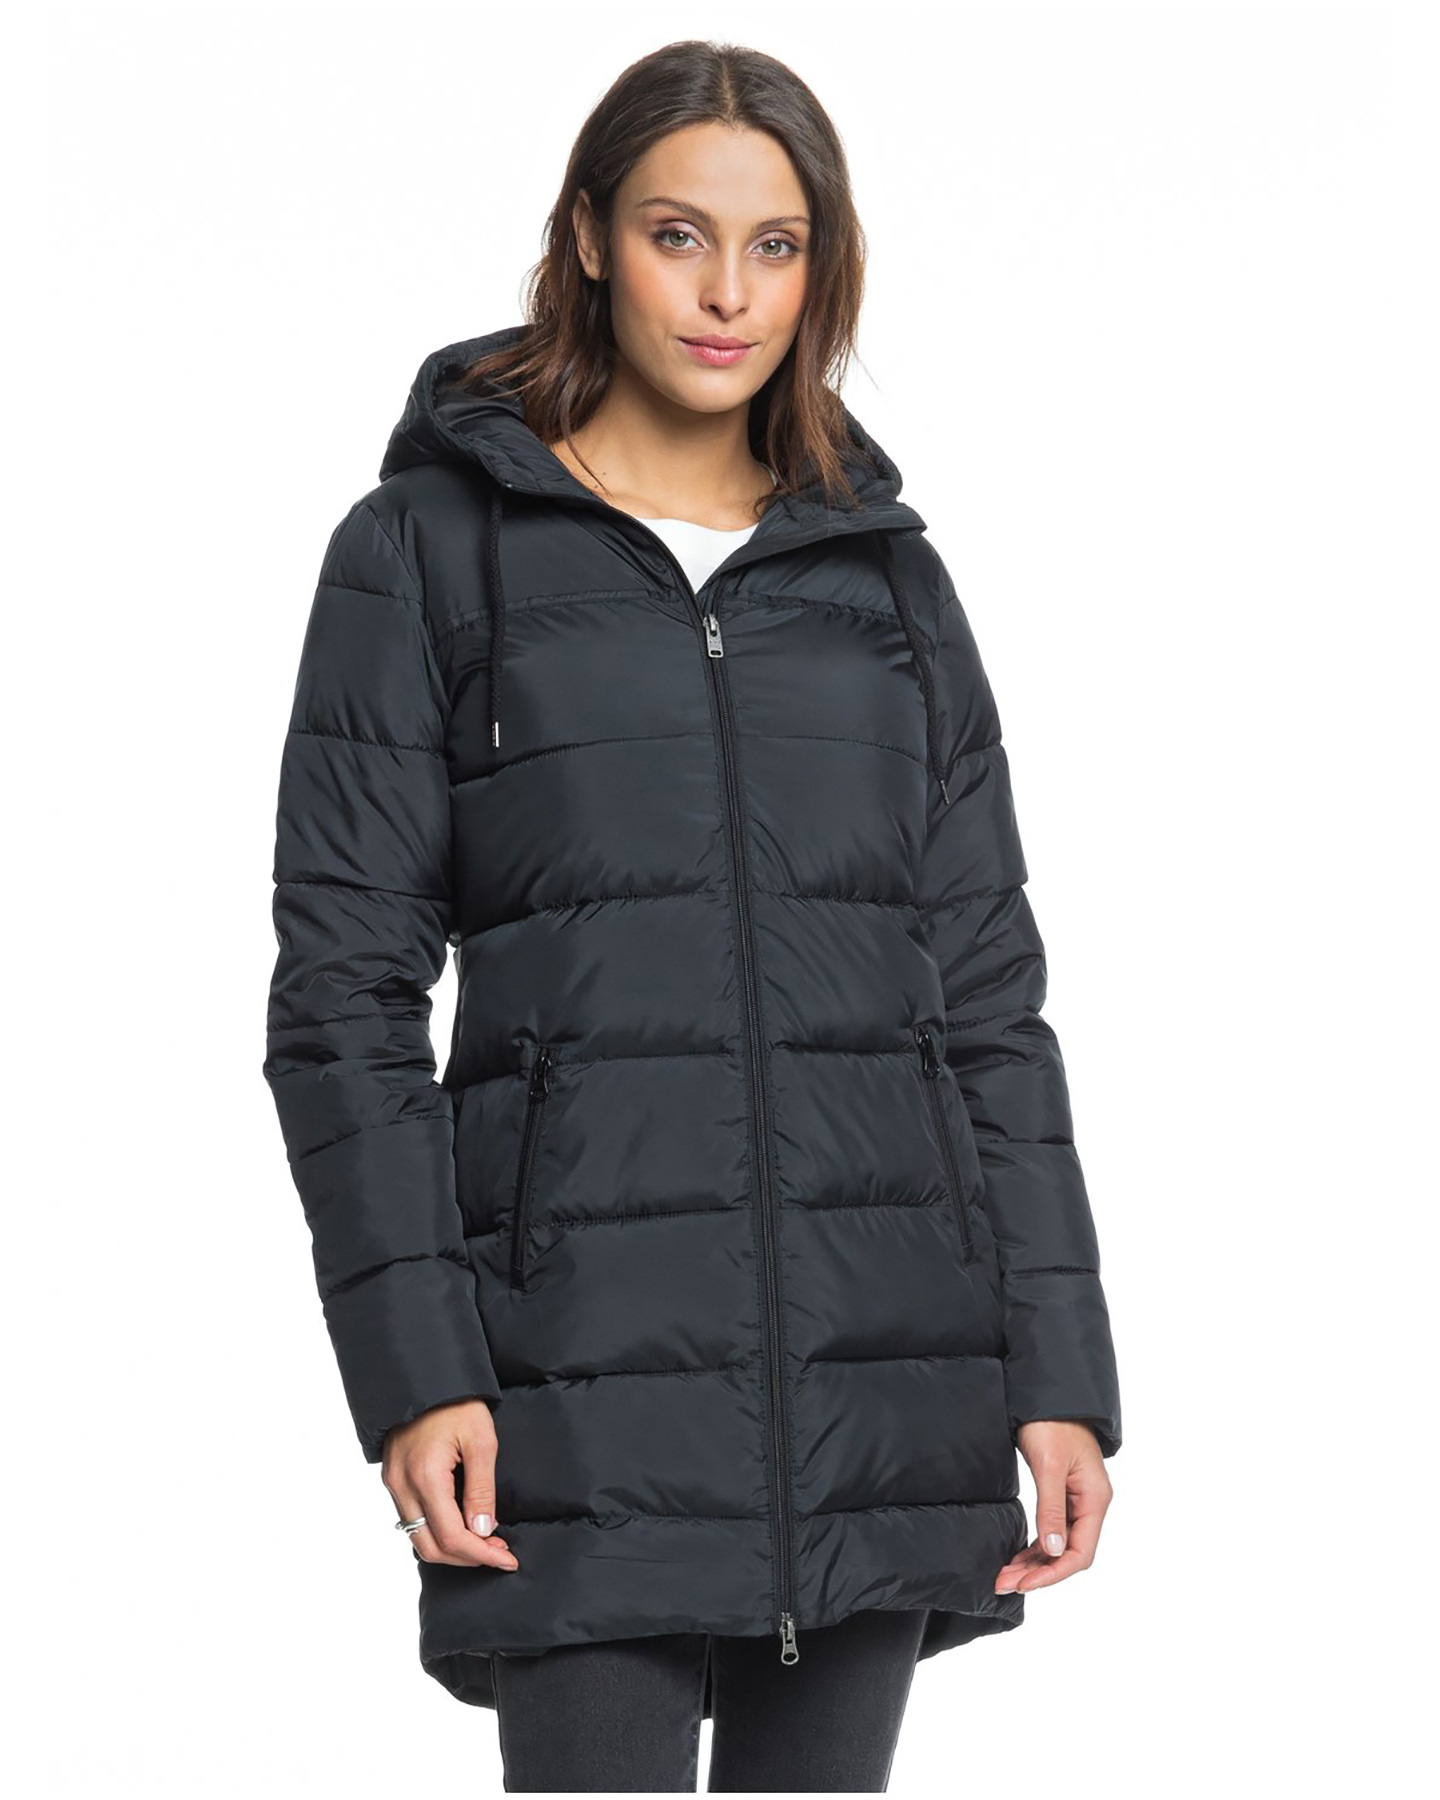 Roxy Womens Southern Nights Puffer Jacket - Anthracite | SurfStitch